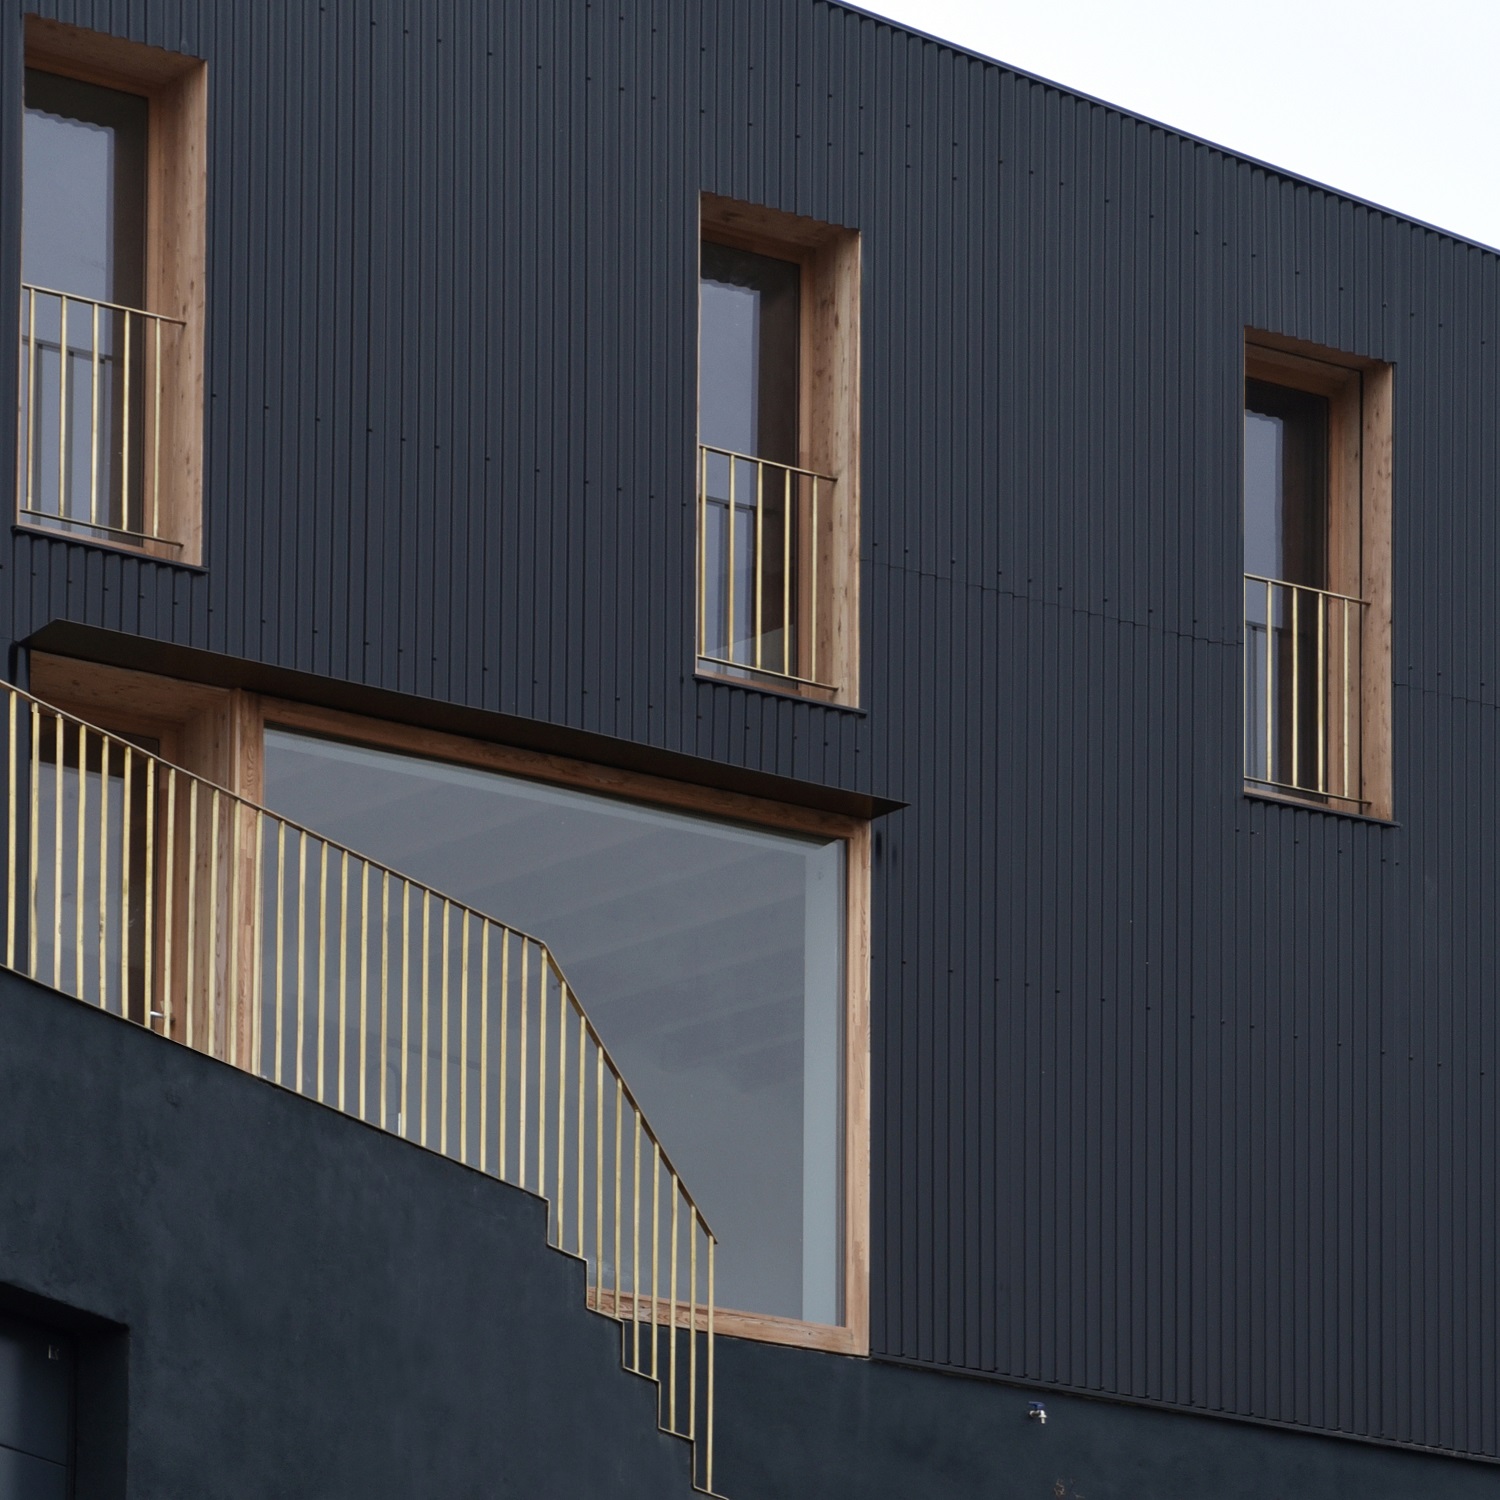 The exterior of the house consists of walls with black cladding and a series of wide openings